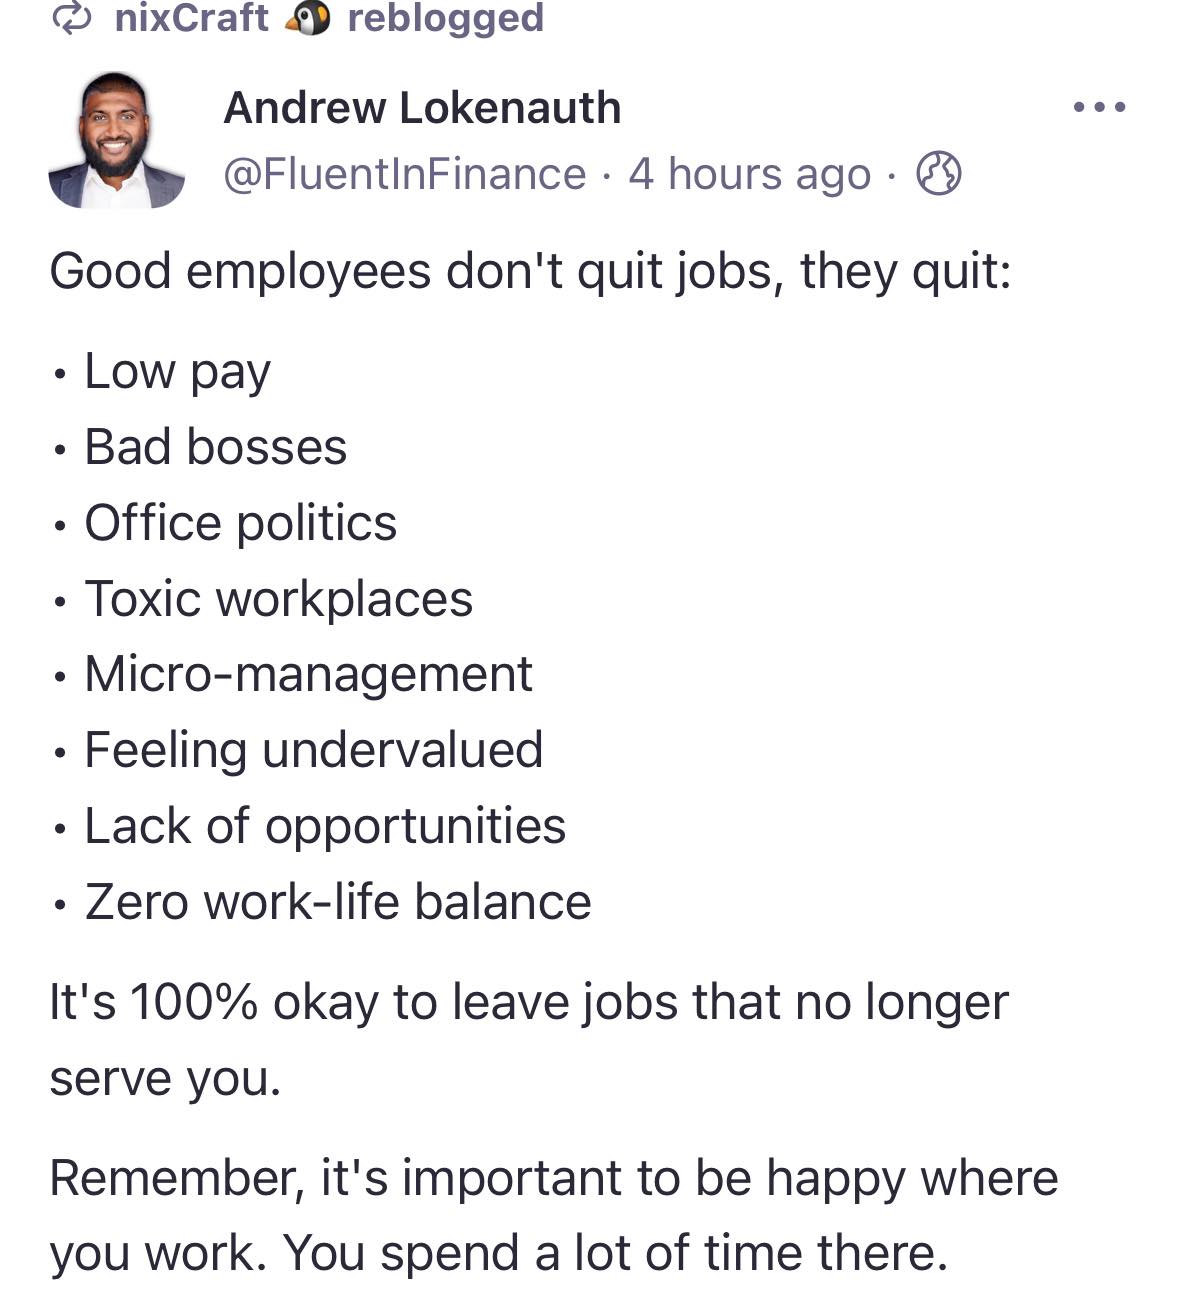 Good employees don't quit jobs, they quit